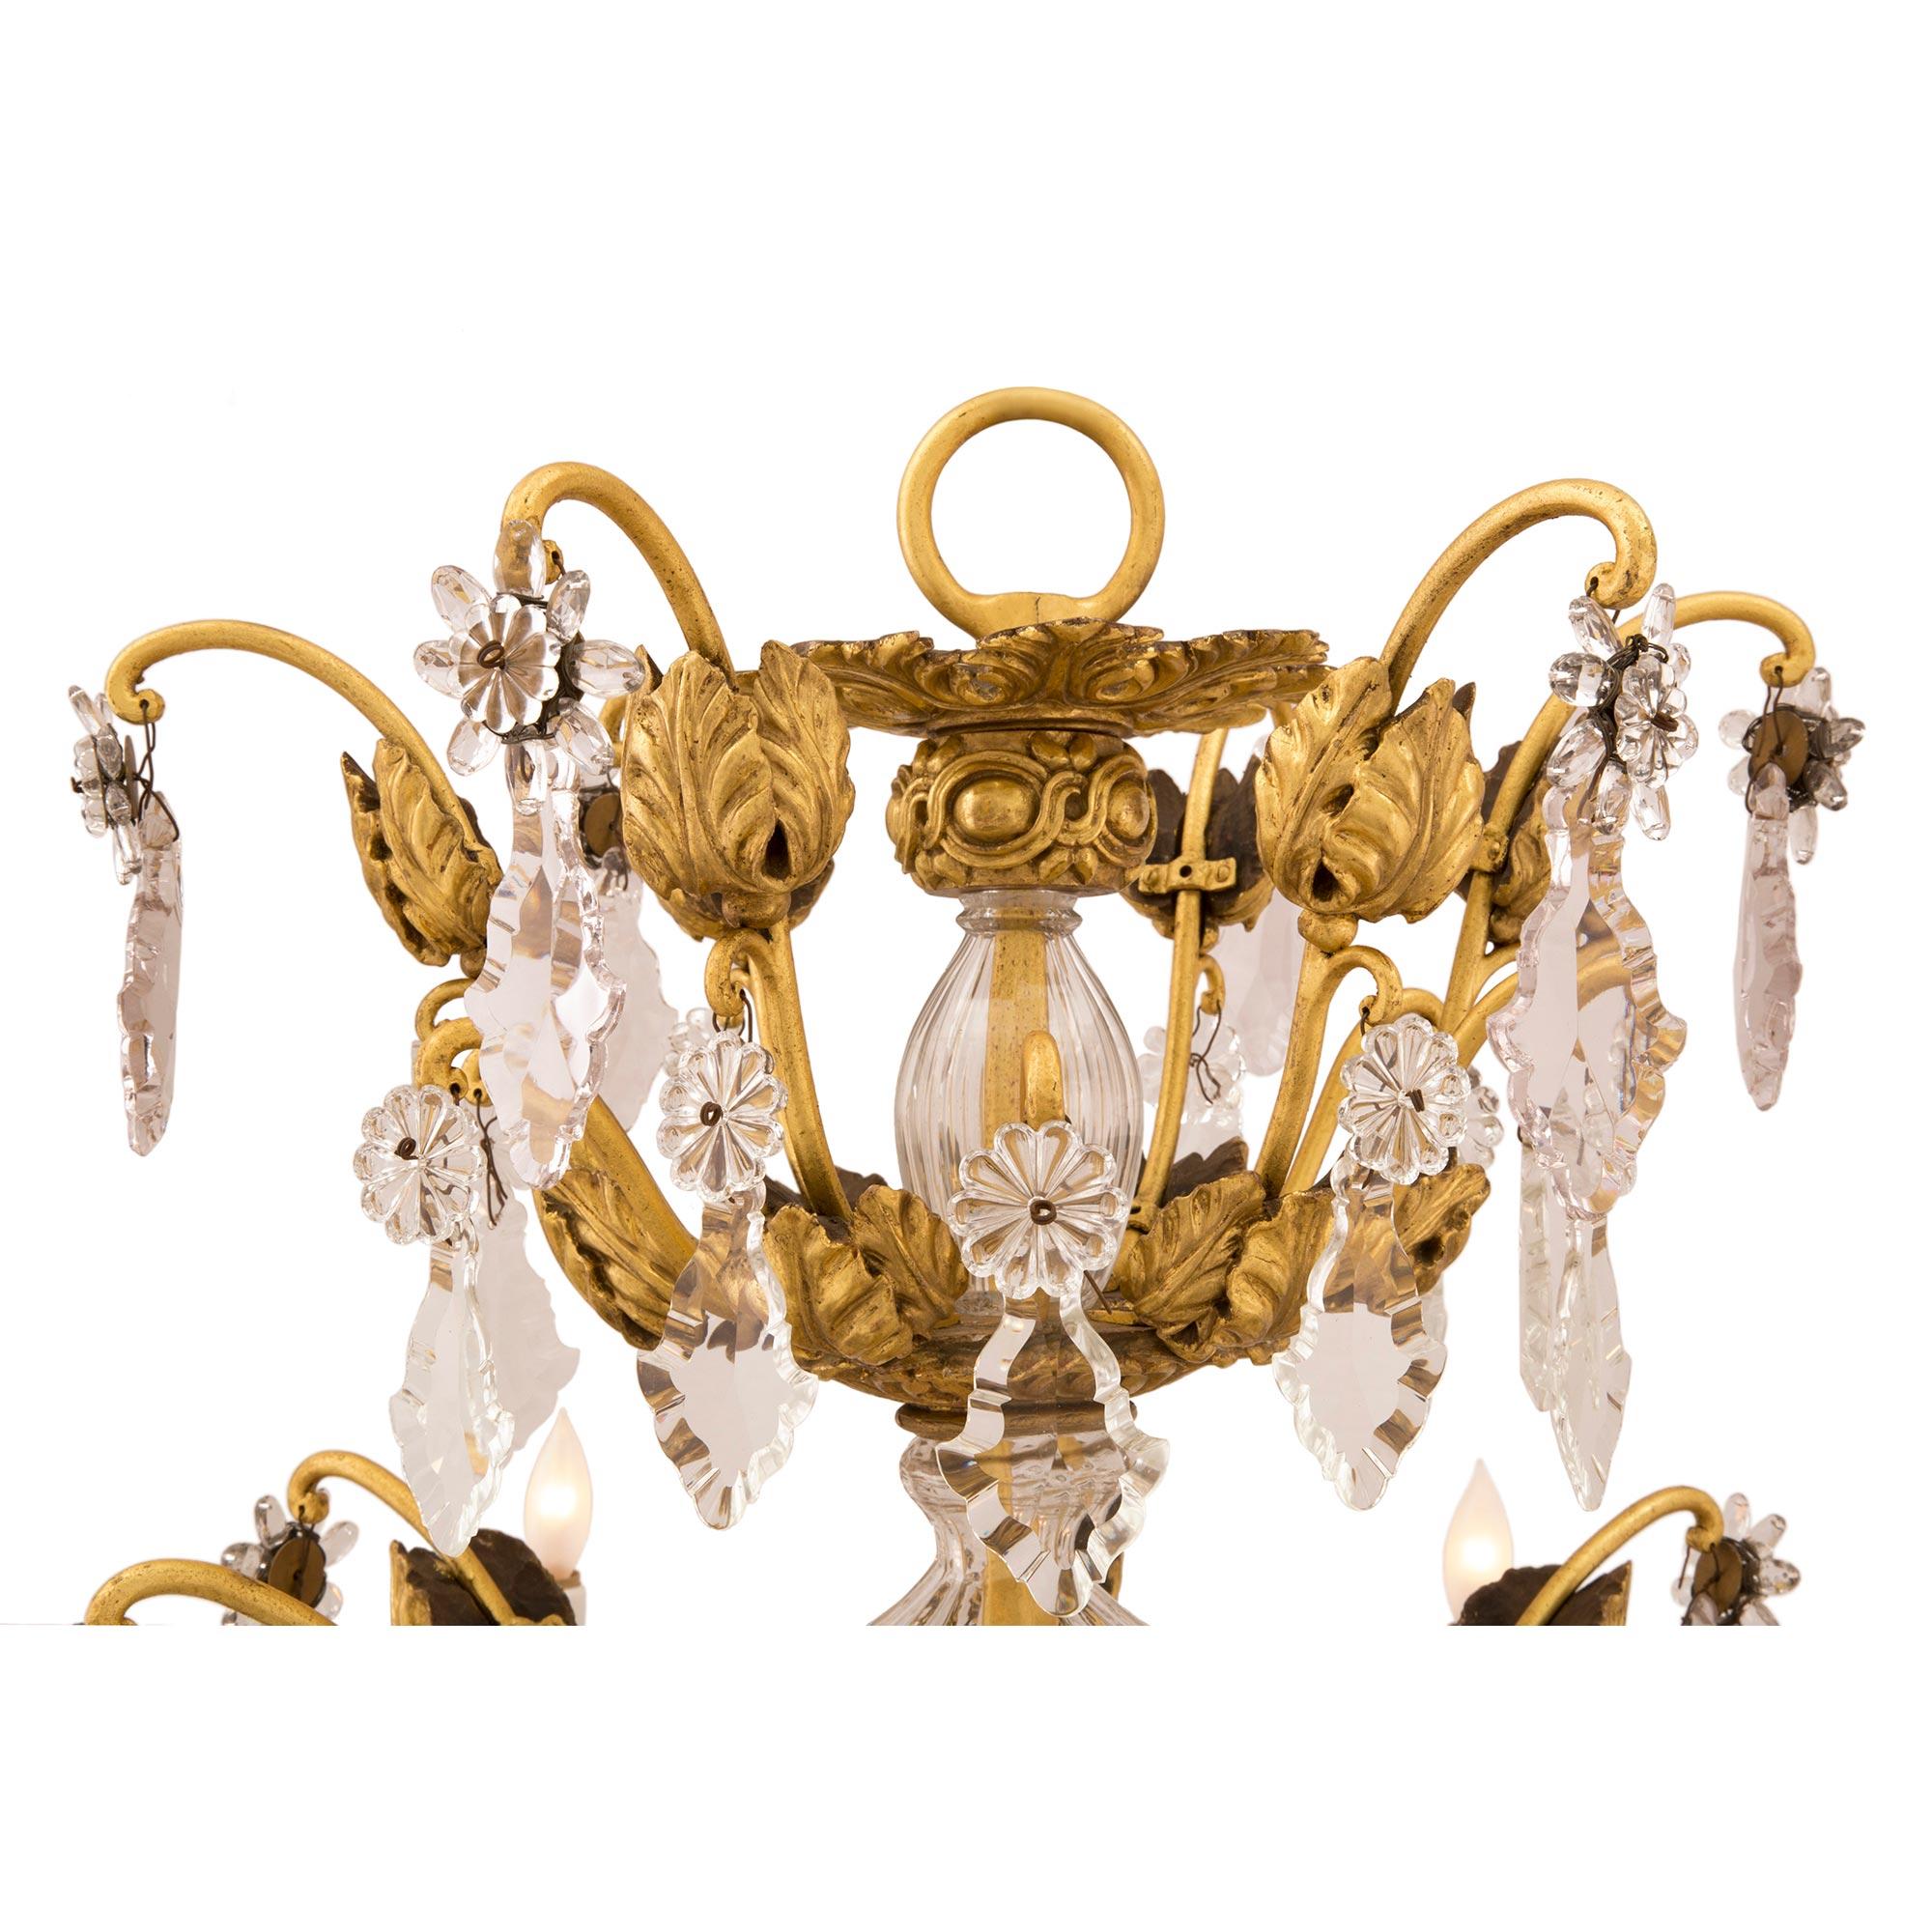 Italian Early 19th Century Tuscan Giltwood, Gilt Metal and Crystal Chandelier In Good Condition For Sale In West Palm Beach, FL